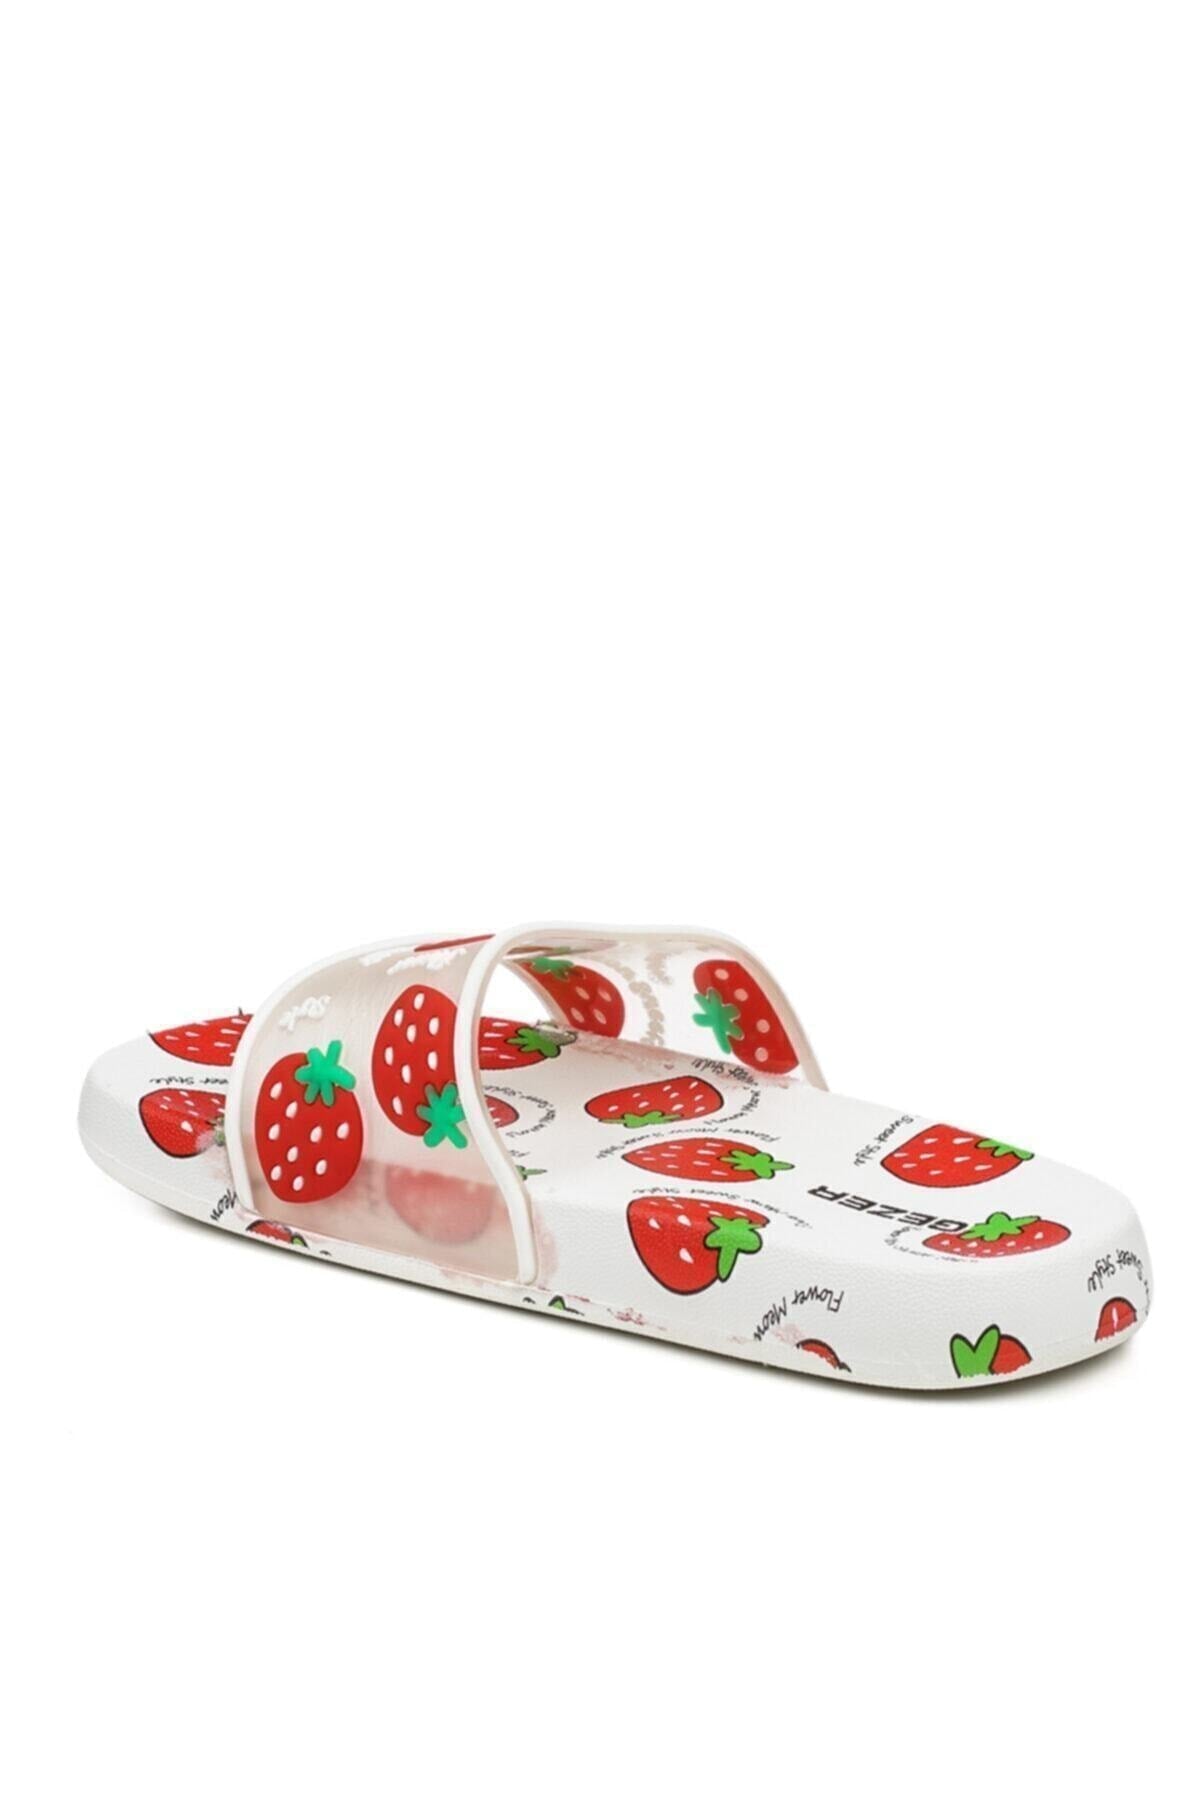 Ultra Soft Woman Sloved Base Strawberry Pattern Pattern Pool Sea and Outdoor Slippers